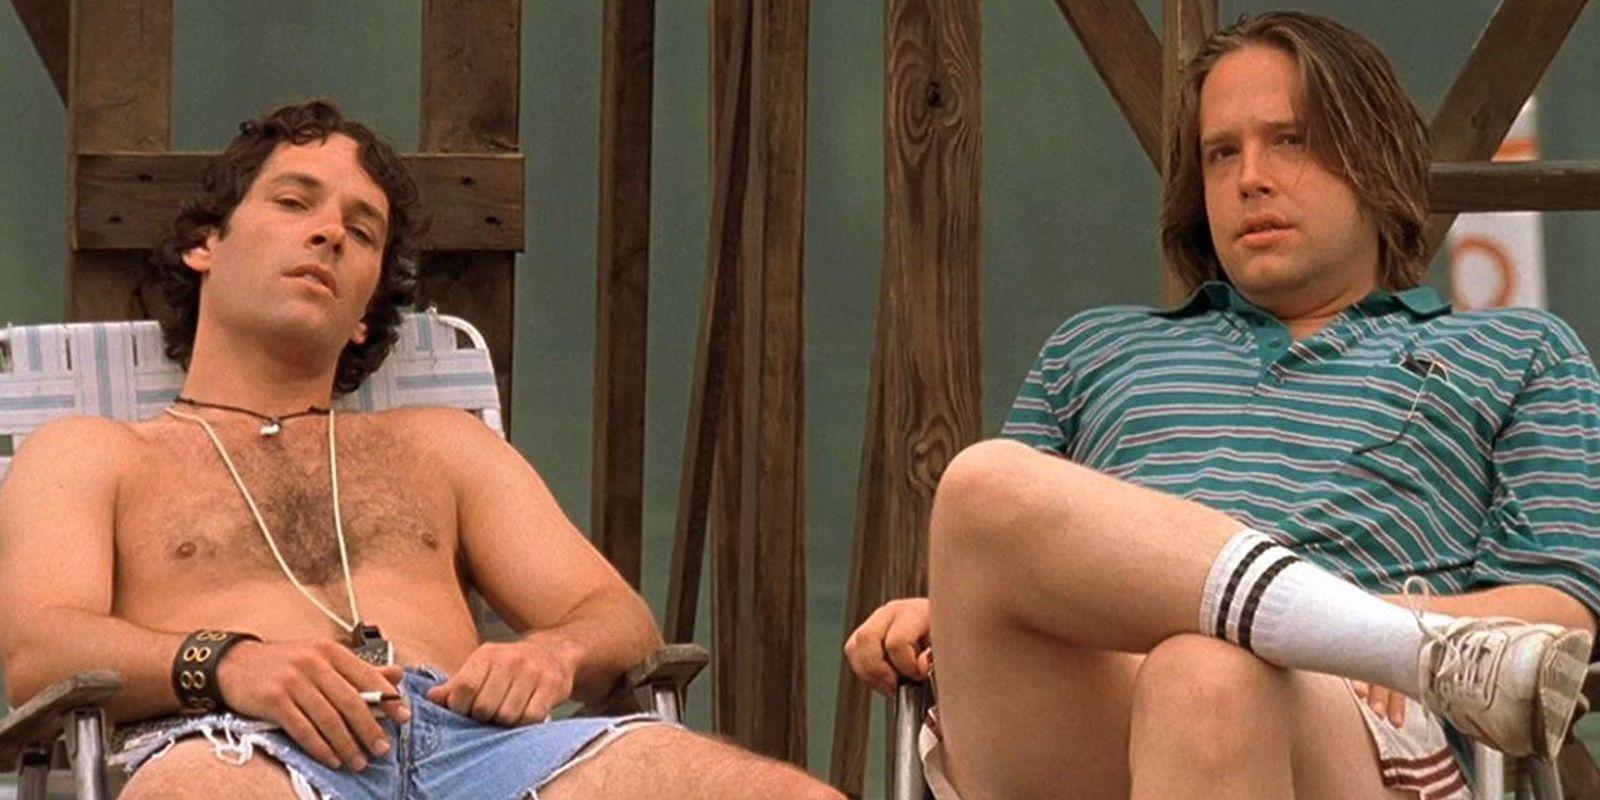 Andy and JJ on the dock in Wet Hot American Summer.